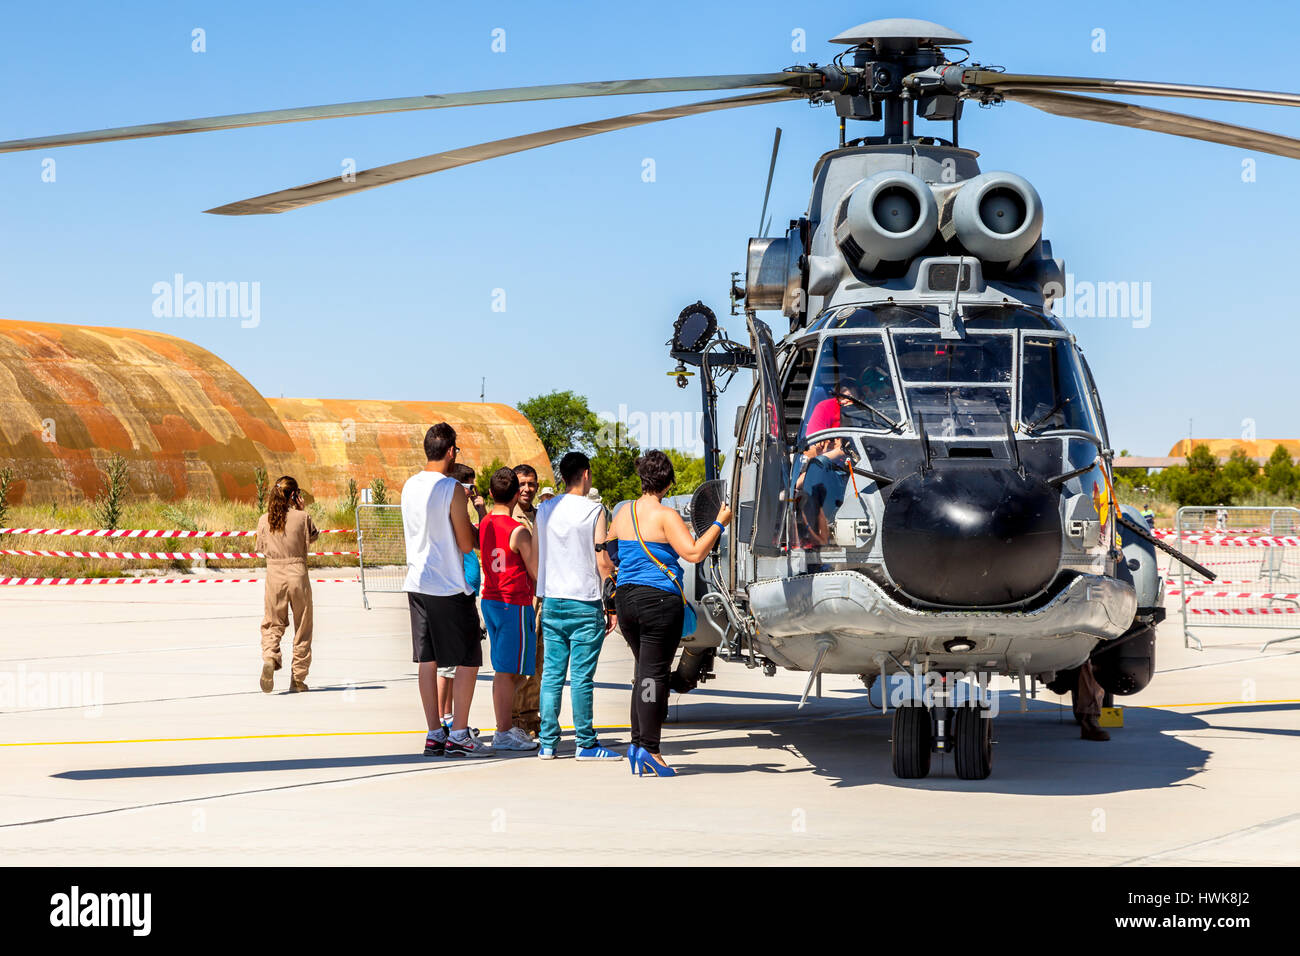 ALBACETE, SPAIN-JUN 23:  Helicopter Eurocopter AS332 Super Puma taking part in a static exhibition on the open day of the airbase of Los Llanos on Jun Stock Photo